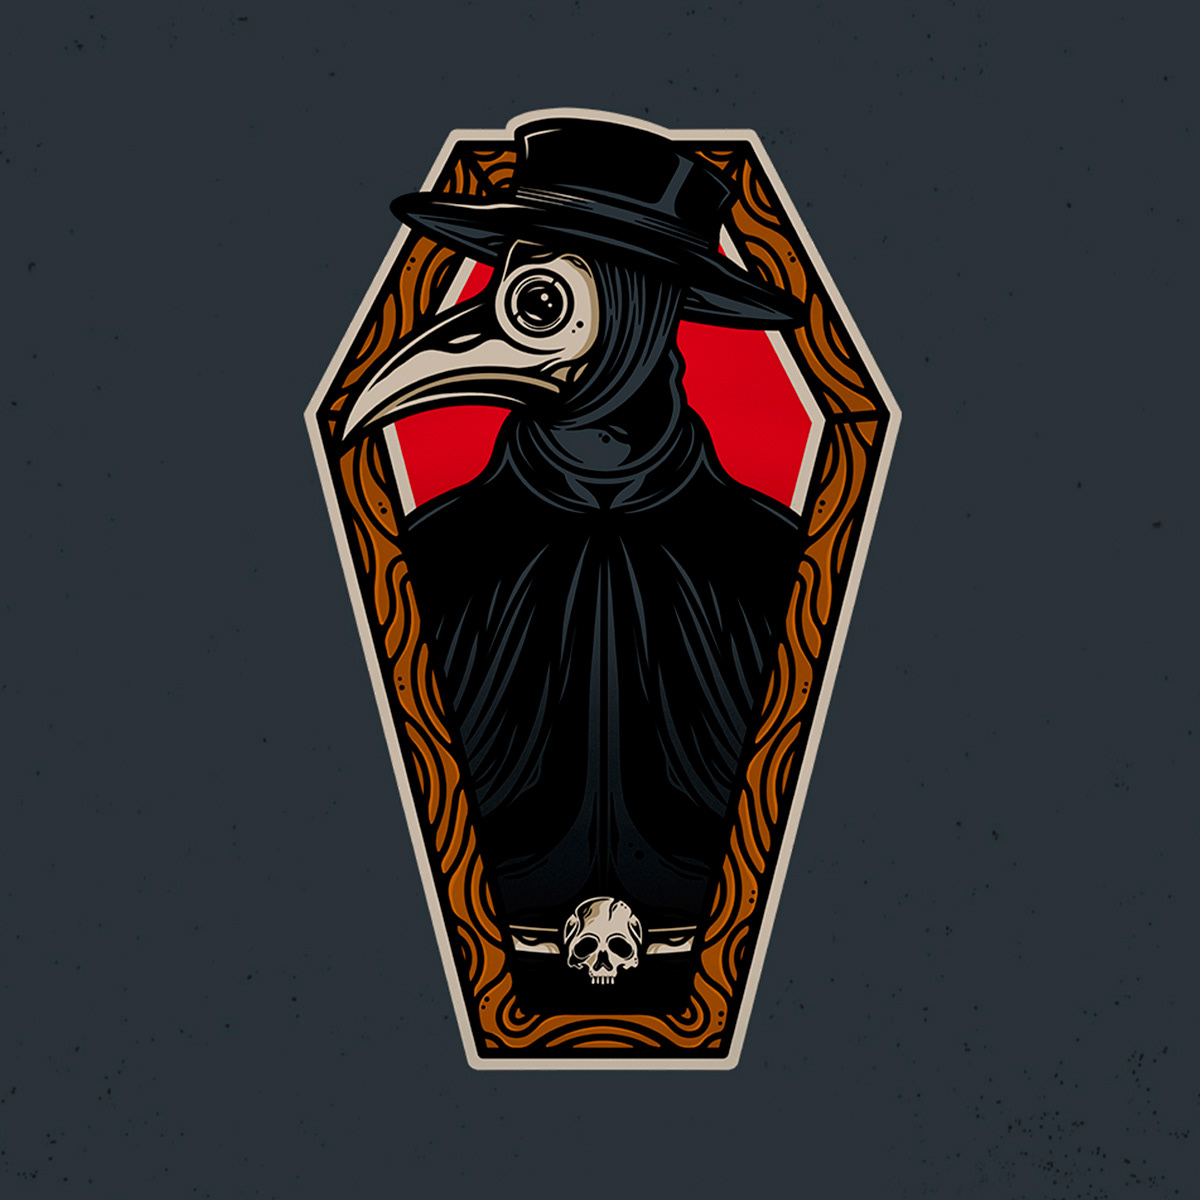 Design of a medieval age plague doctor in vintage/retro traditional tattoo style.